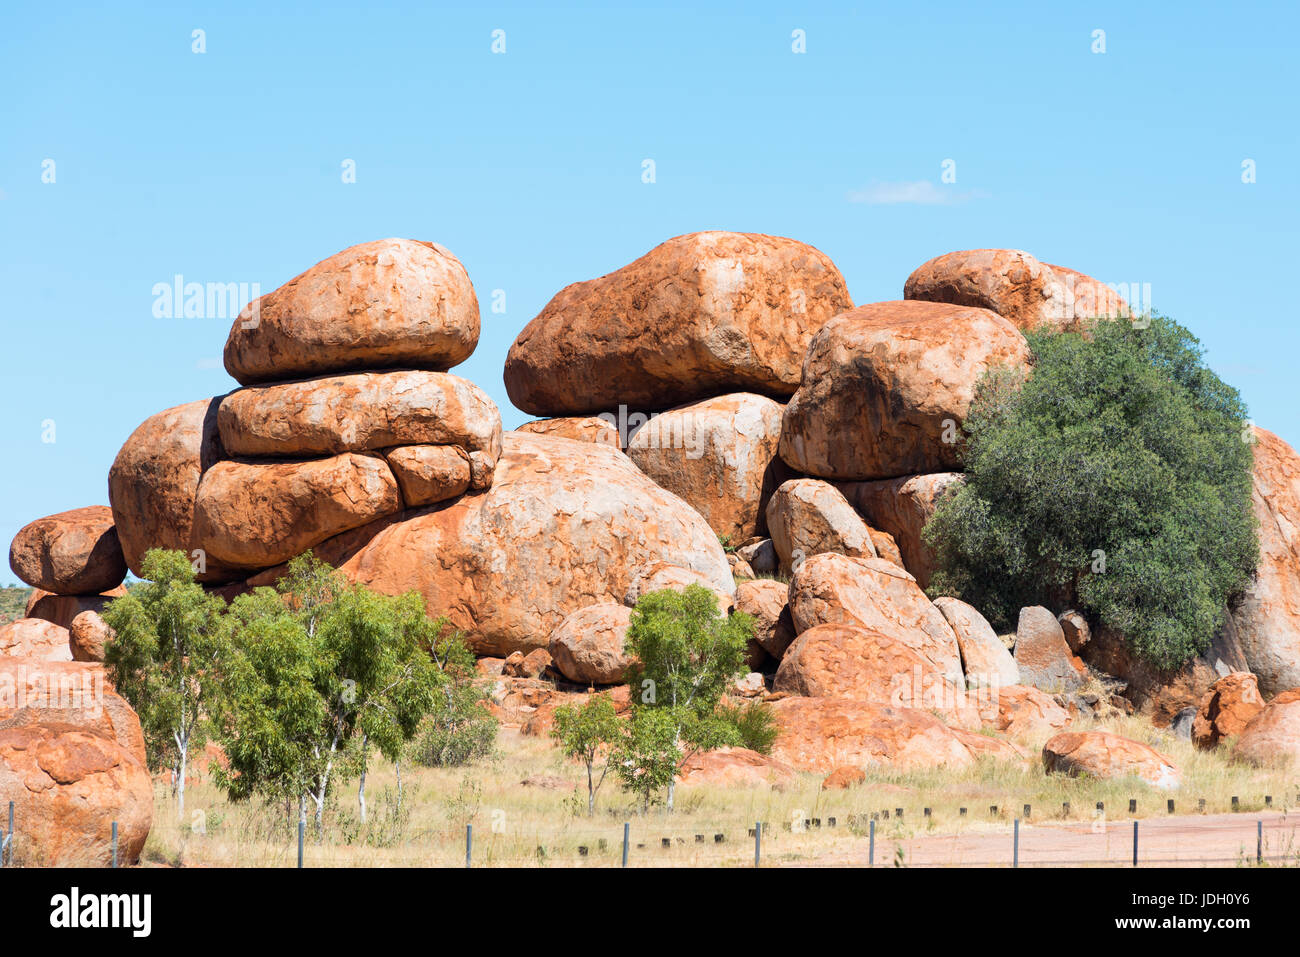 Devils Marbles - boulders of red granite are balanced on bedrock, Australia, Northern Territory. Stock Photo